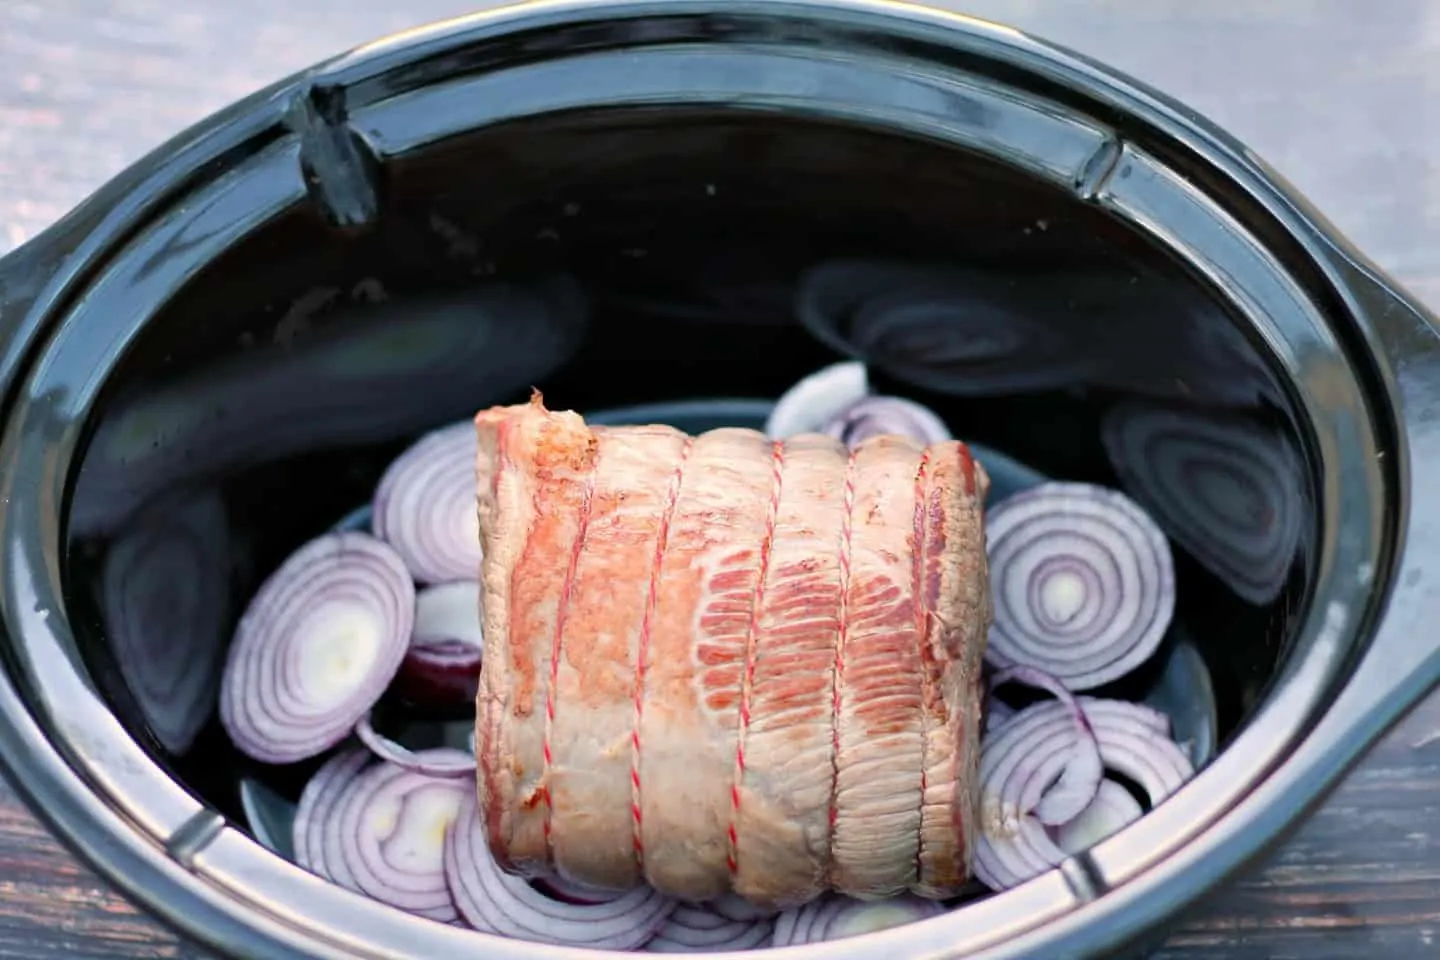 Beef brisket in slow cooker on bed of onions.